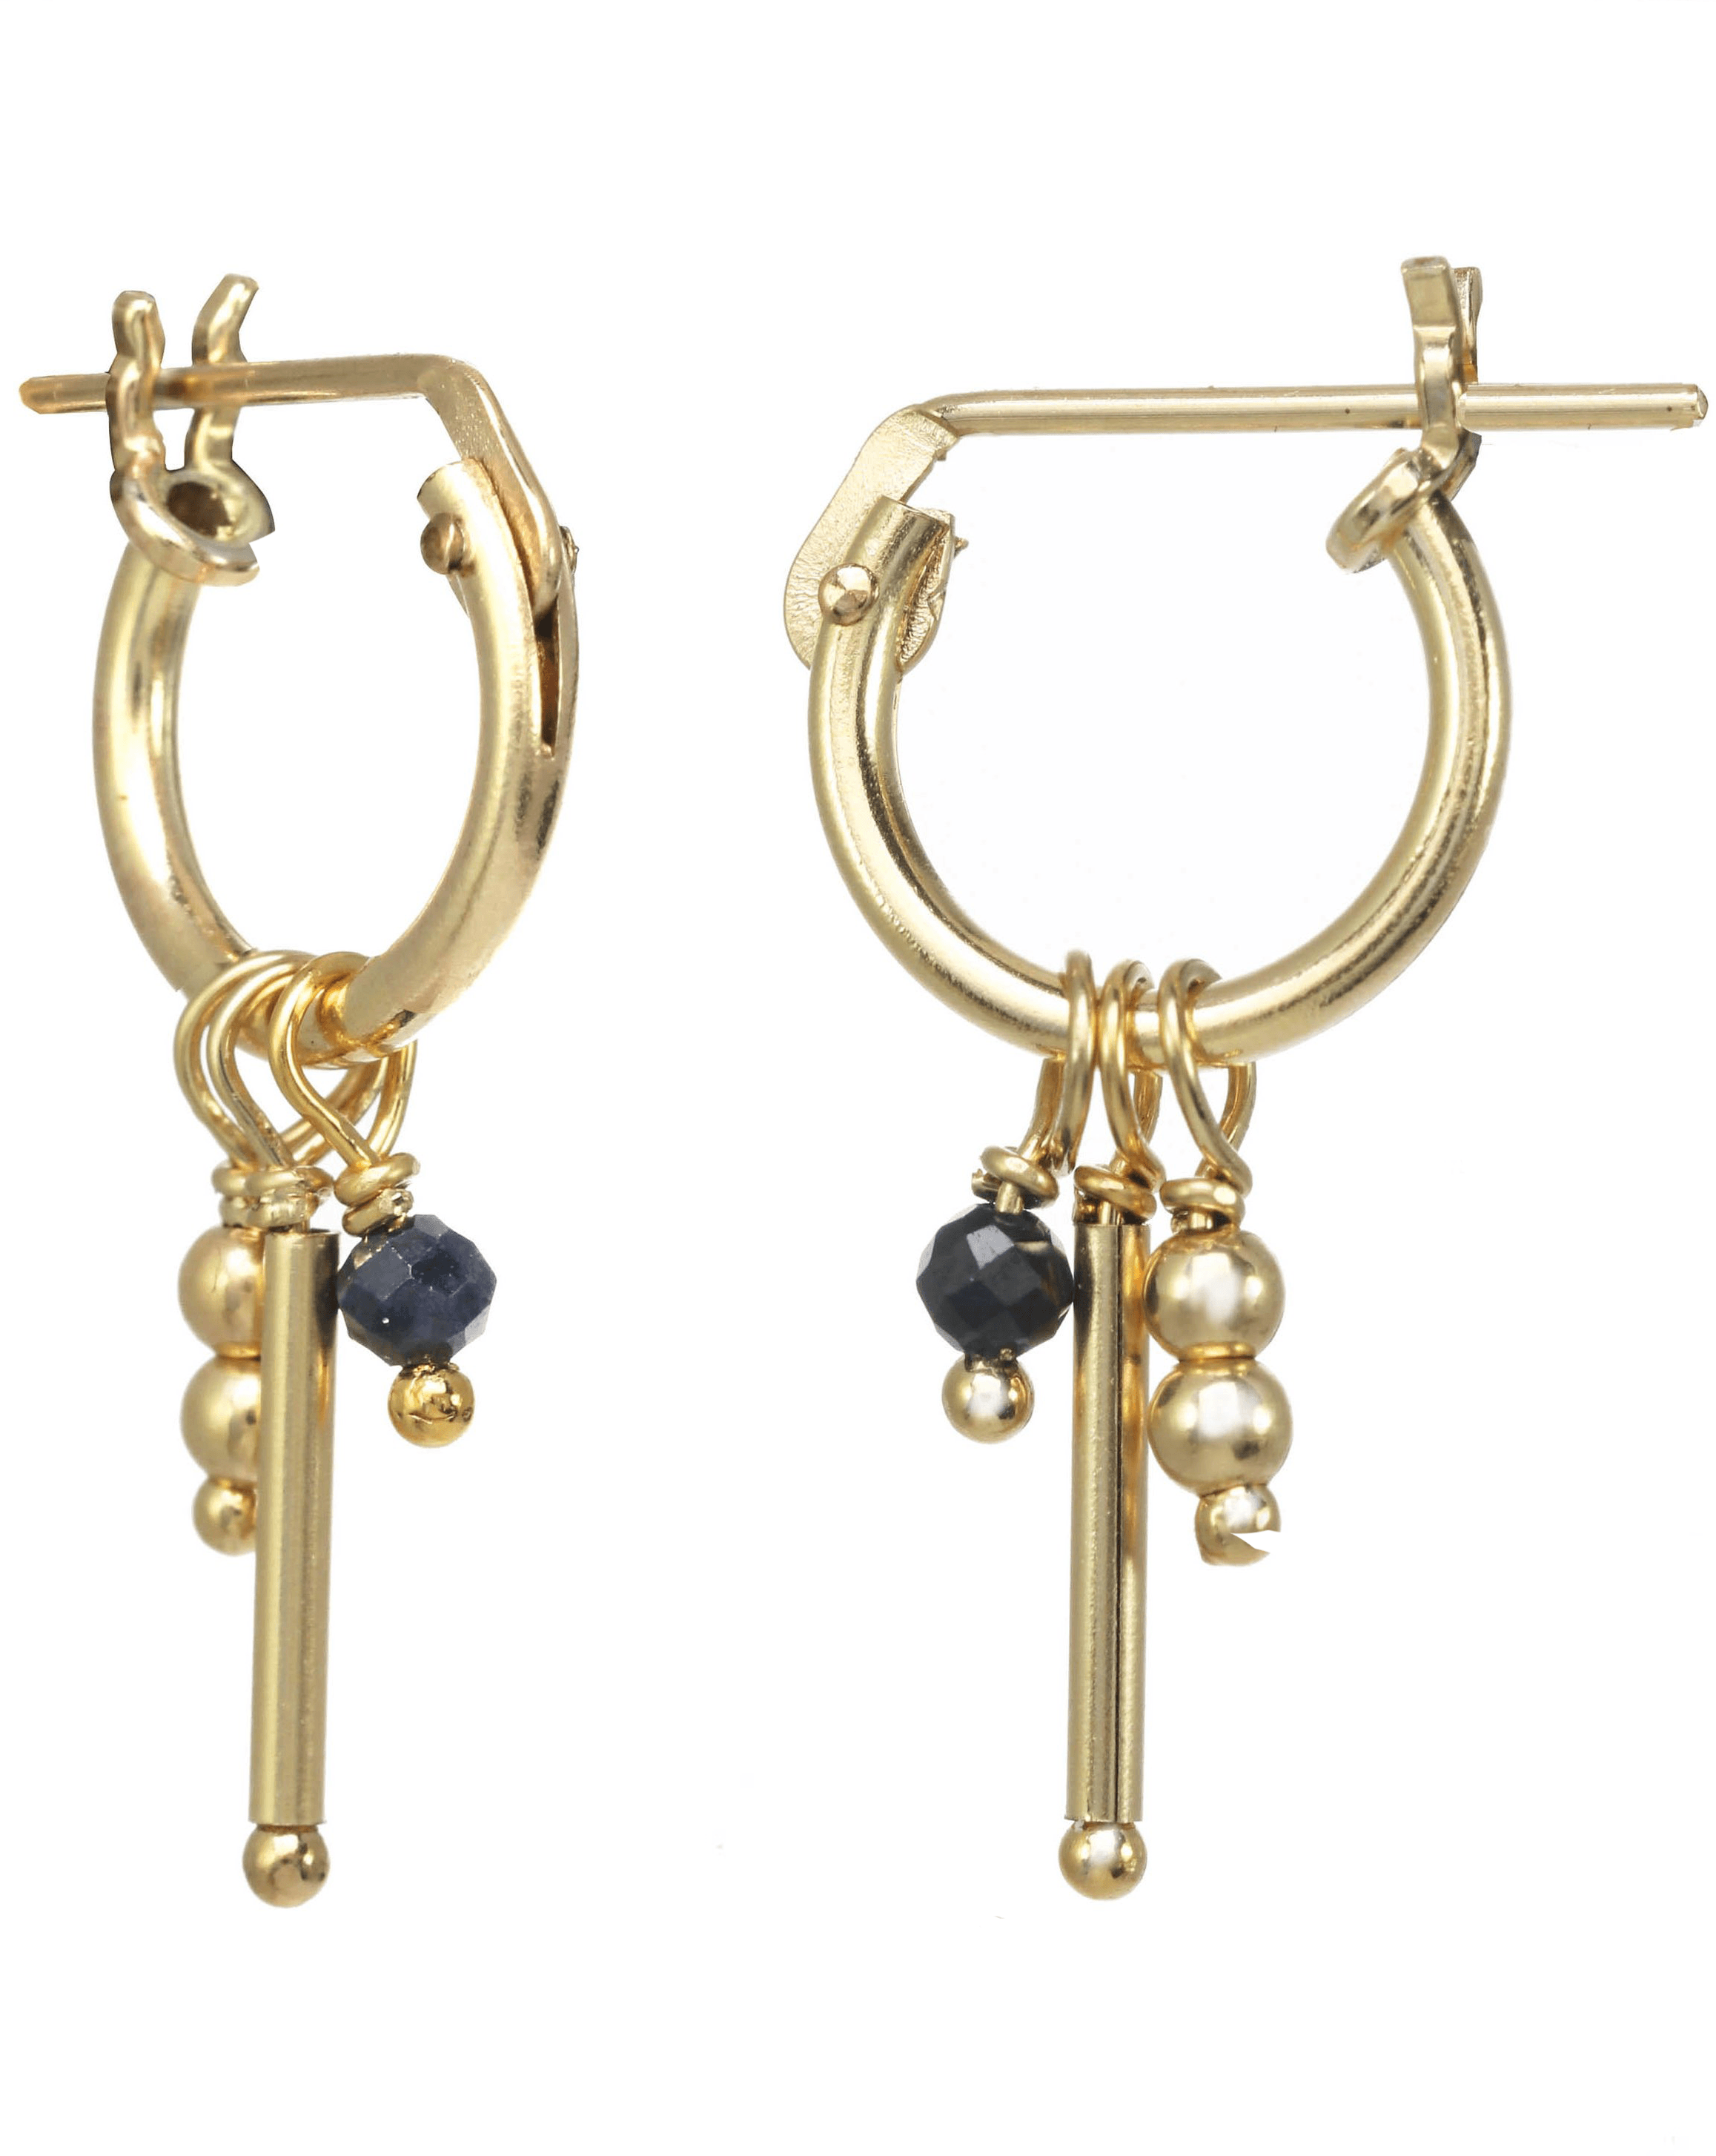 Misty Hoop Earrings by KOZAKH. 10mm snap hoop earrings in 14K Gold Filled, featuring a 2mm faceted gem, a vertical bar, and seamless beads.